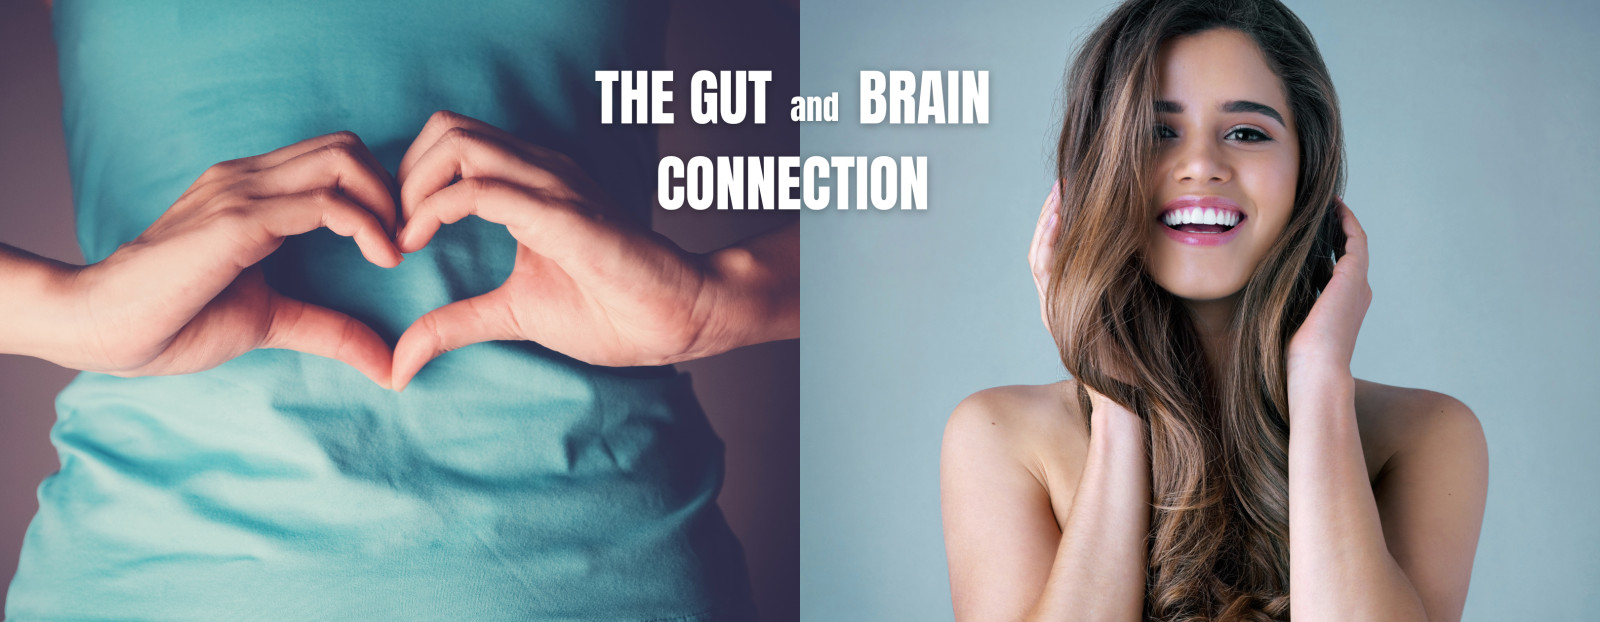 The Gut and Brain Connection ~ 4 Rs to Gut Health